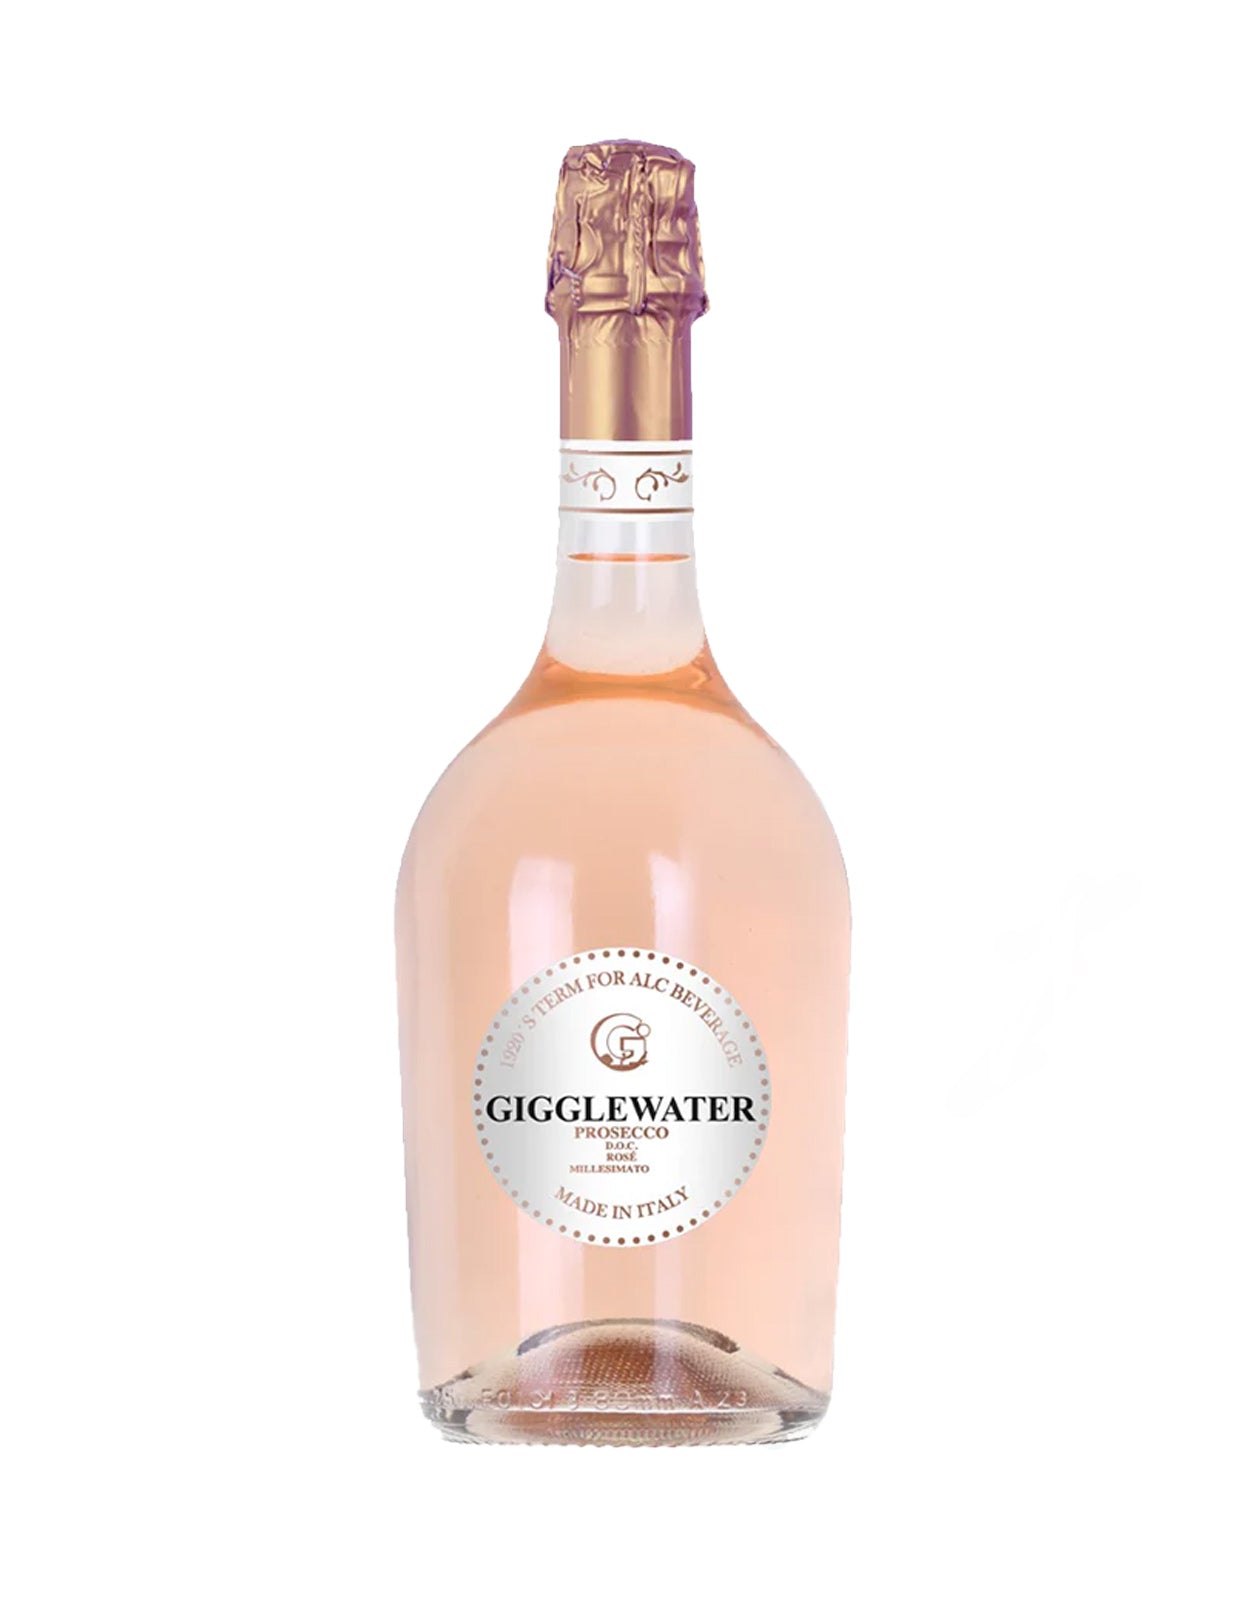 Gigglewater Prosecco Rose 2021